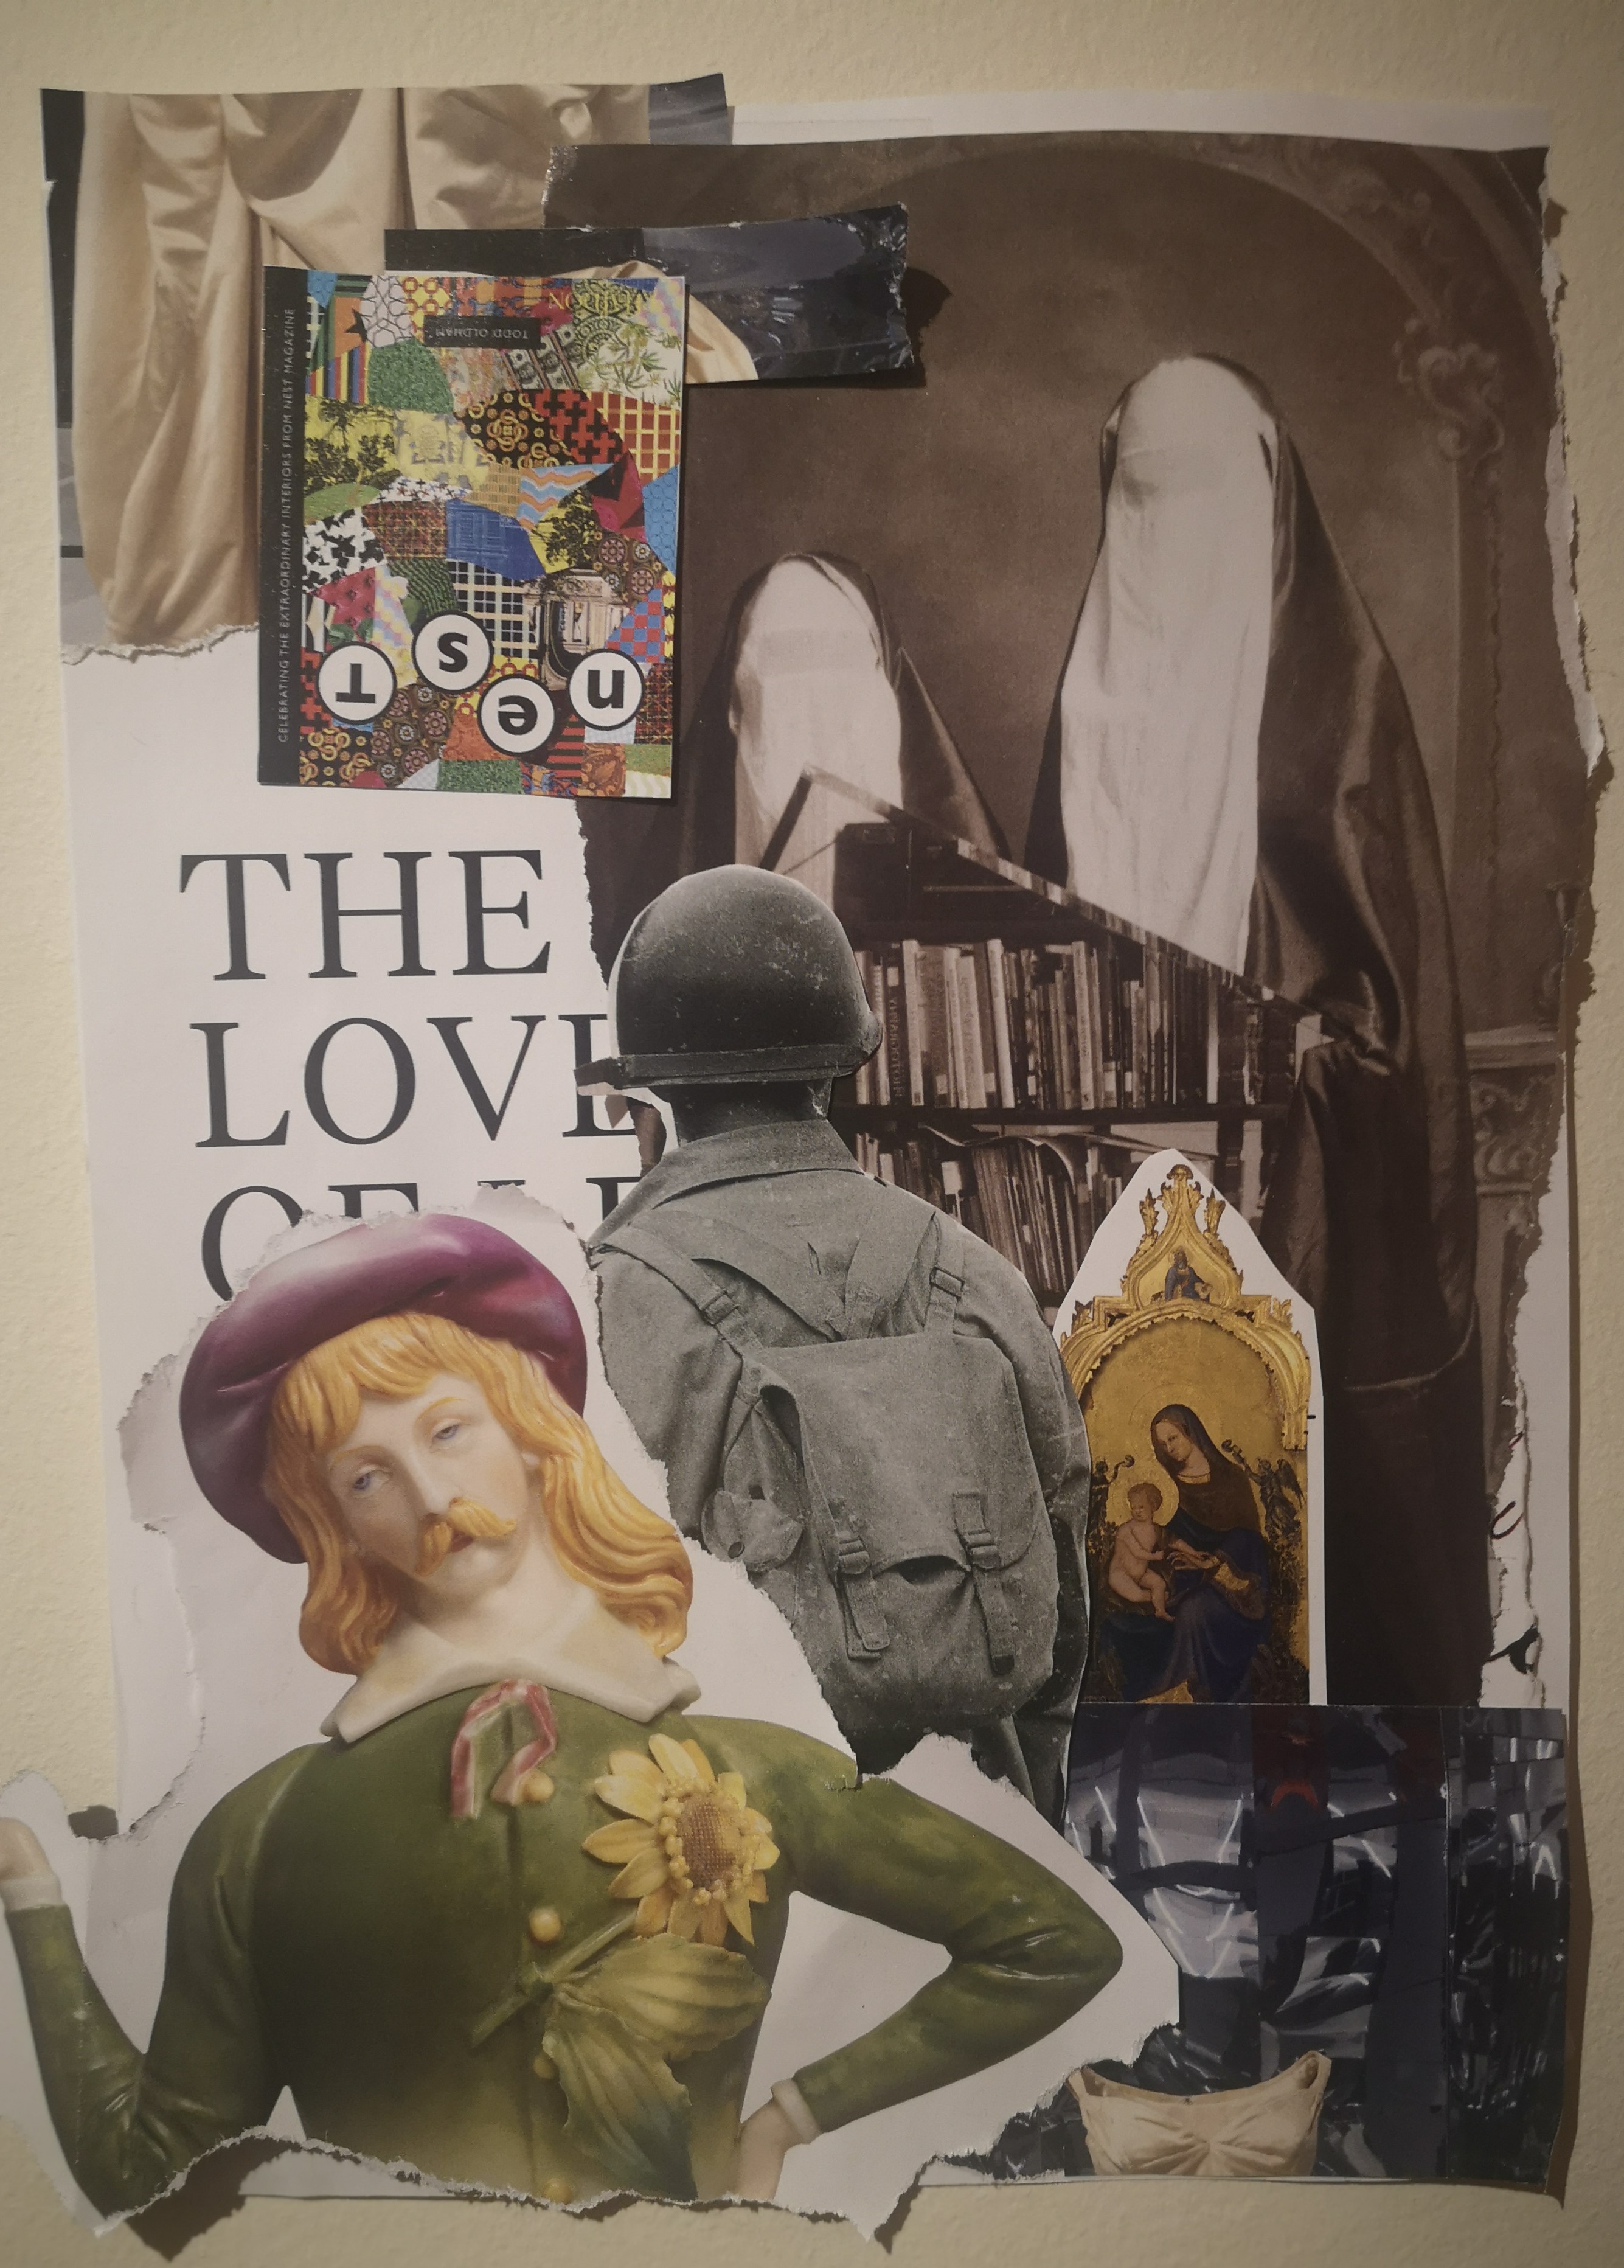 A collage featuring a number of juxtaposed images, including a soldier, a religious icon and the words 